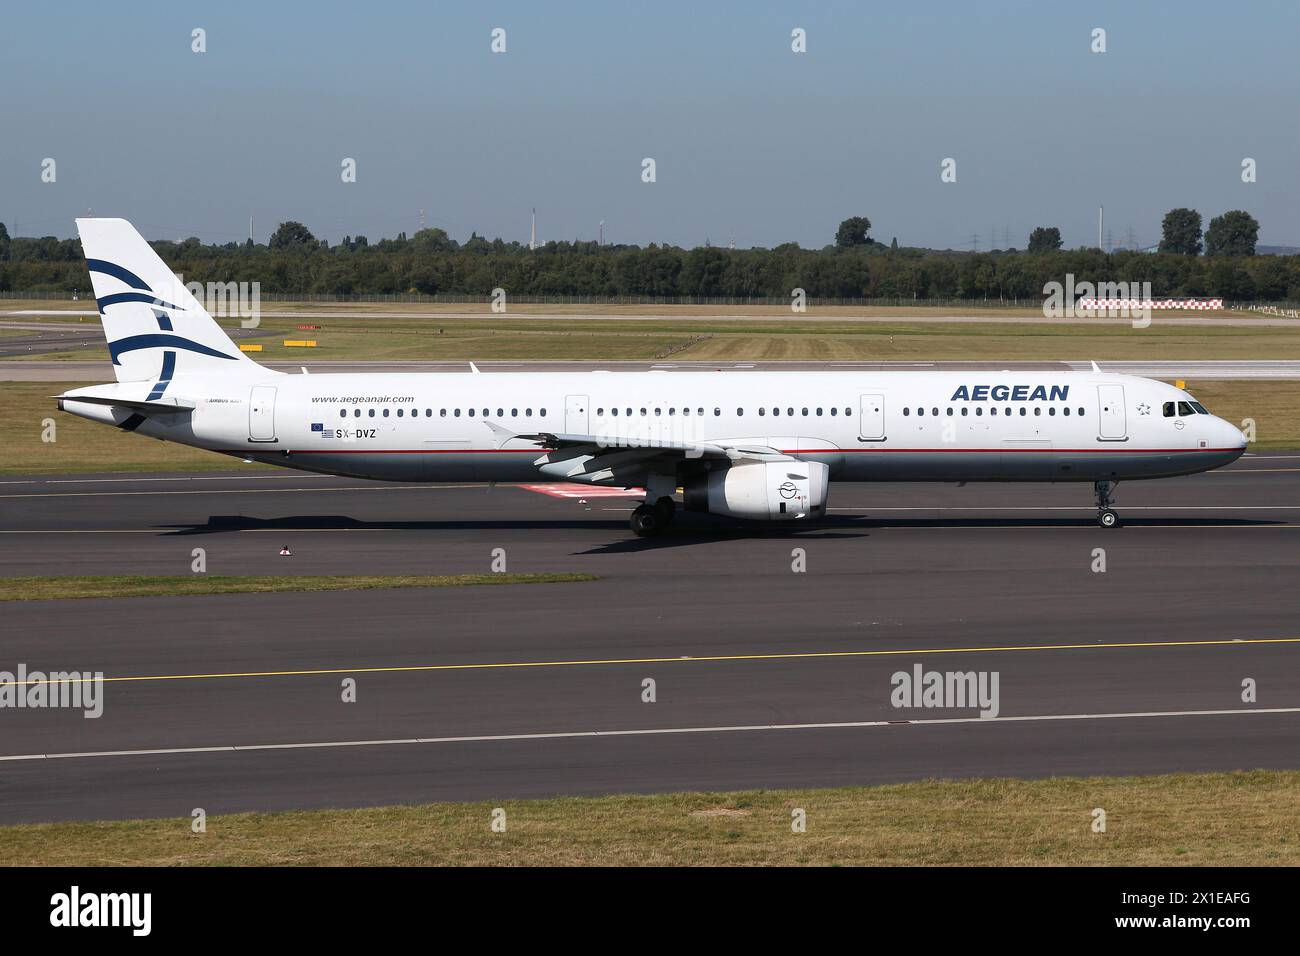 Greek Aegean Airlines Airbus A321-200 with registration SX-DVZ on taxiway at Dusseldorf Airport Stock Photo